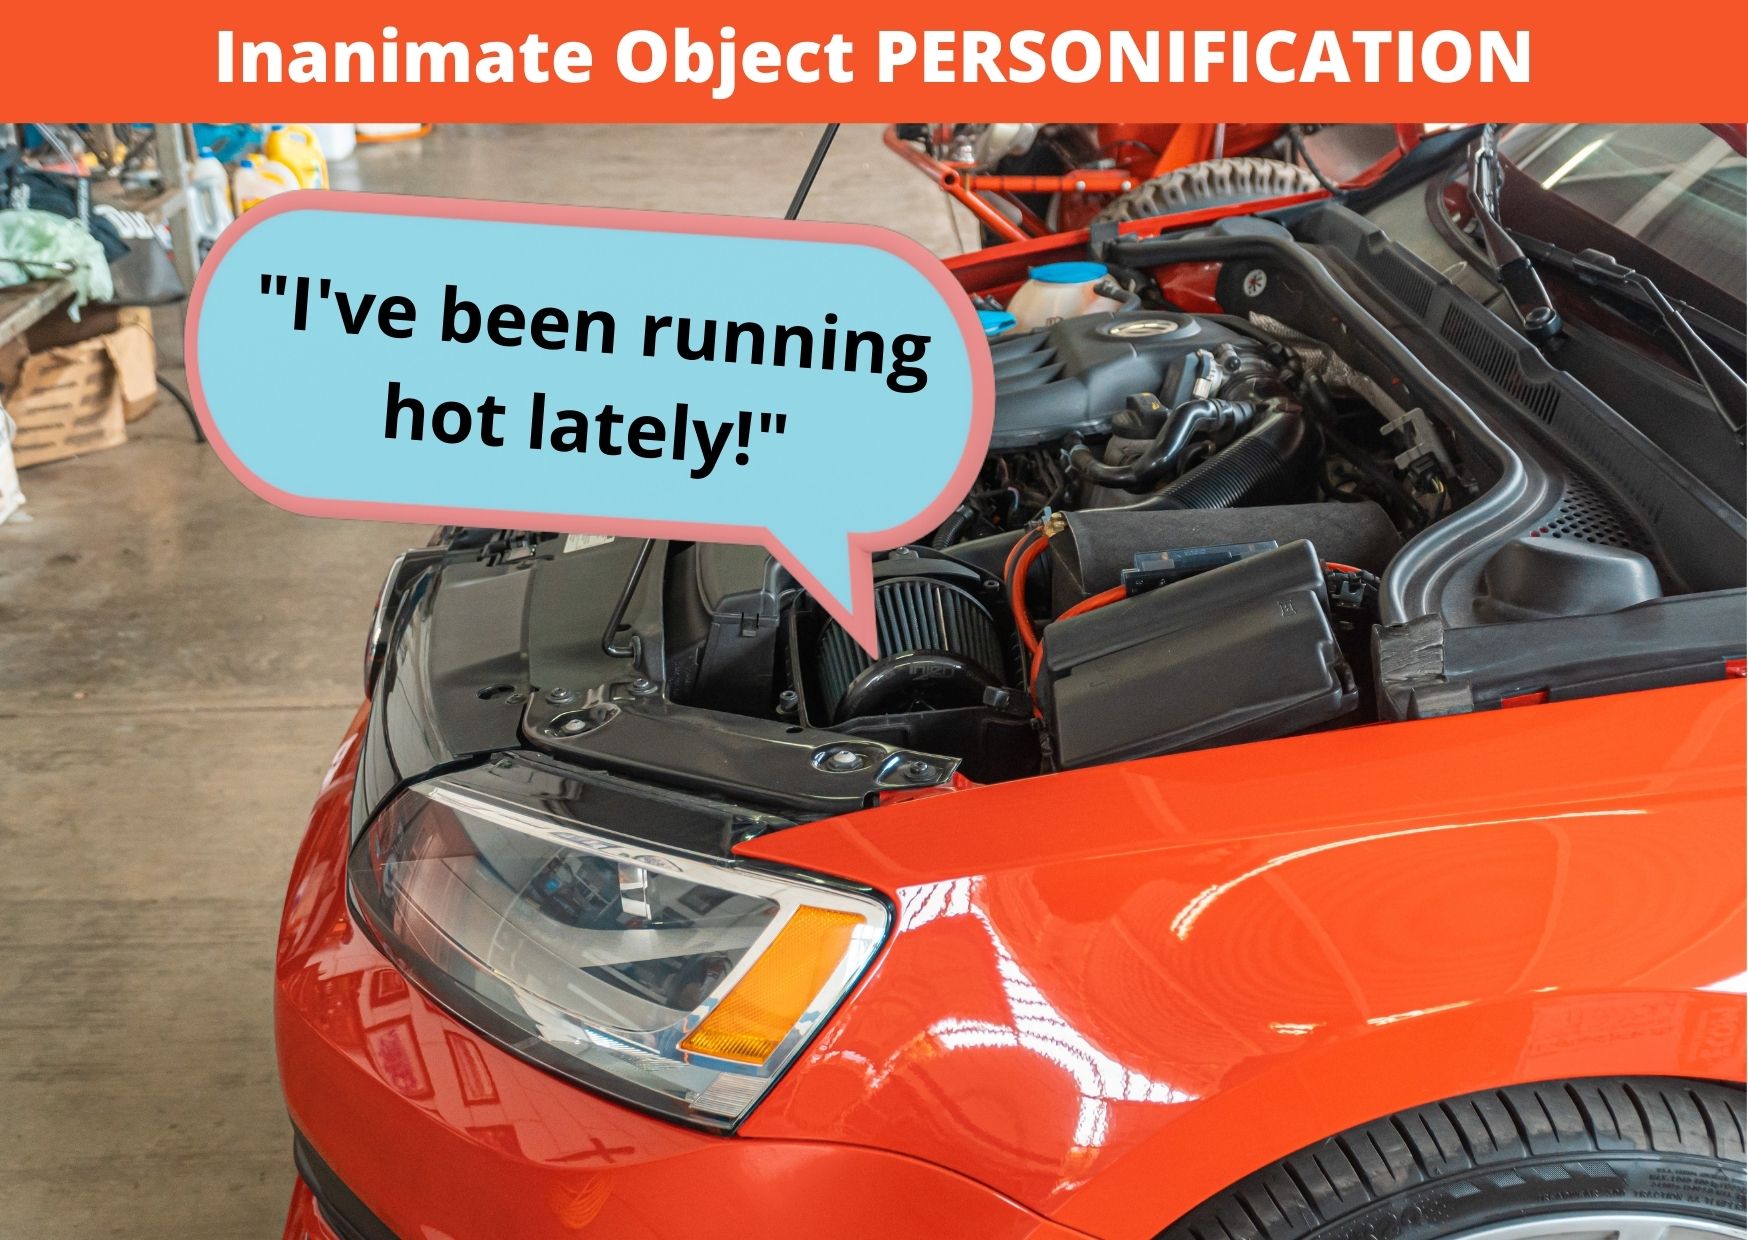 A graphic explaining inanimate object personification